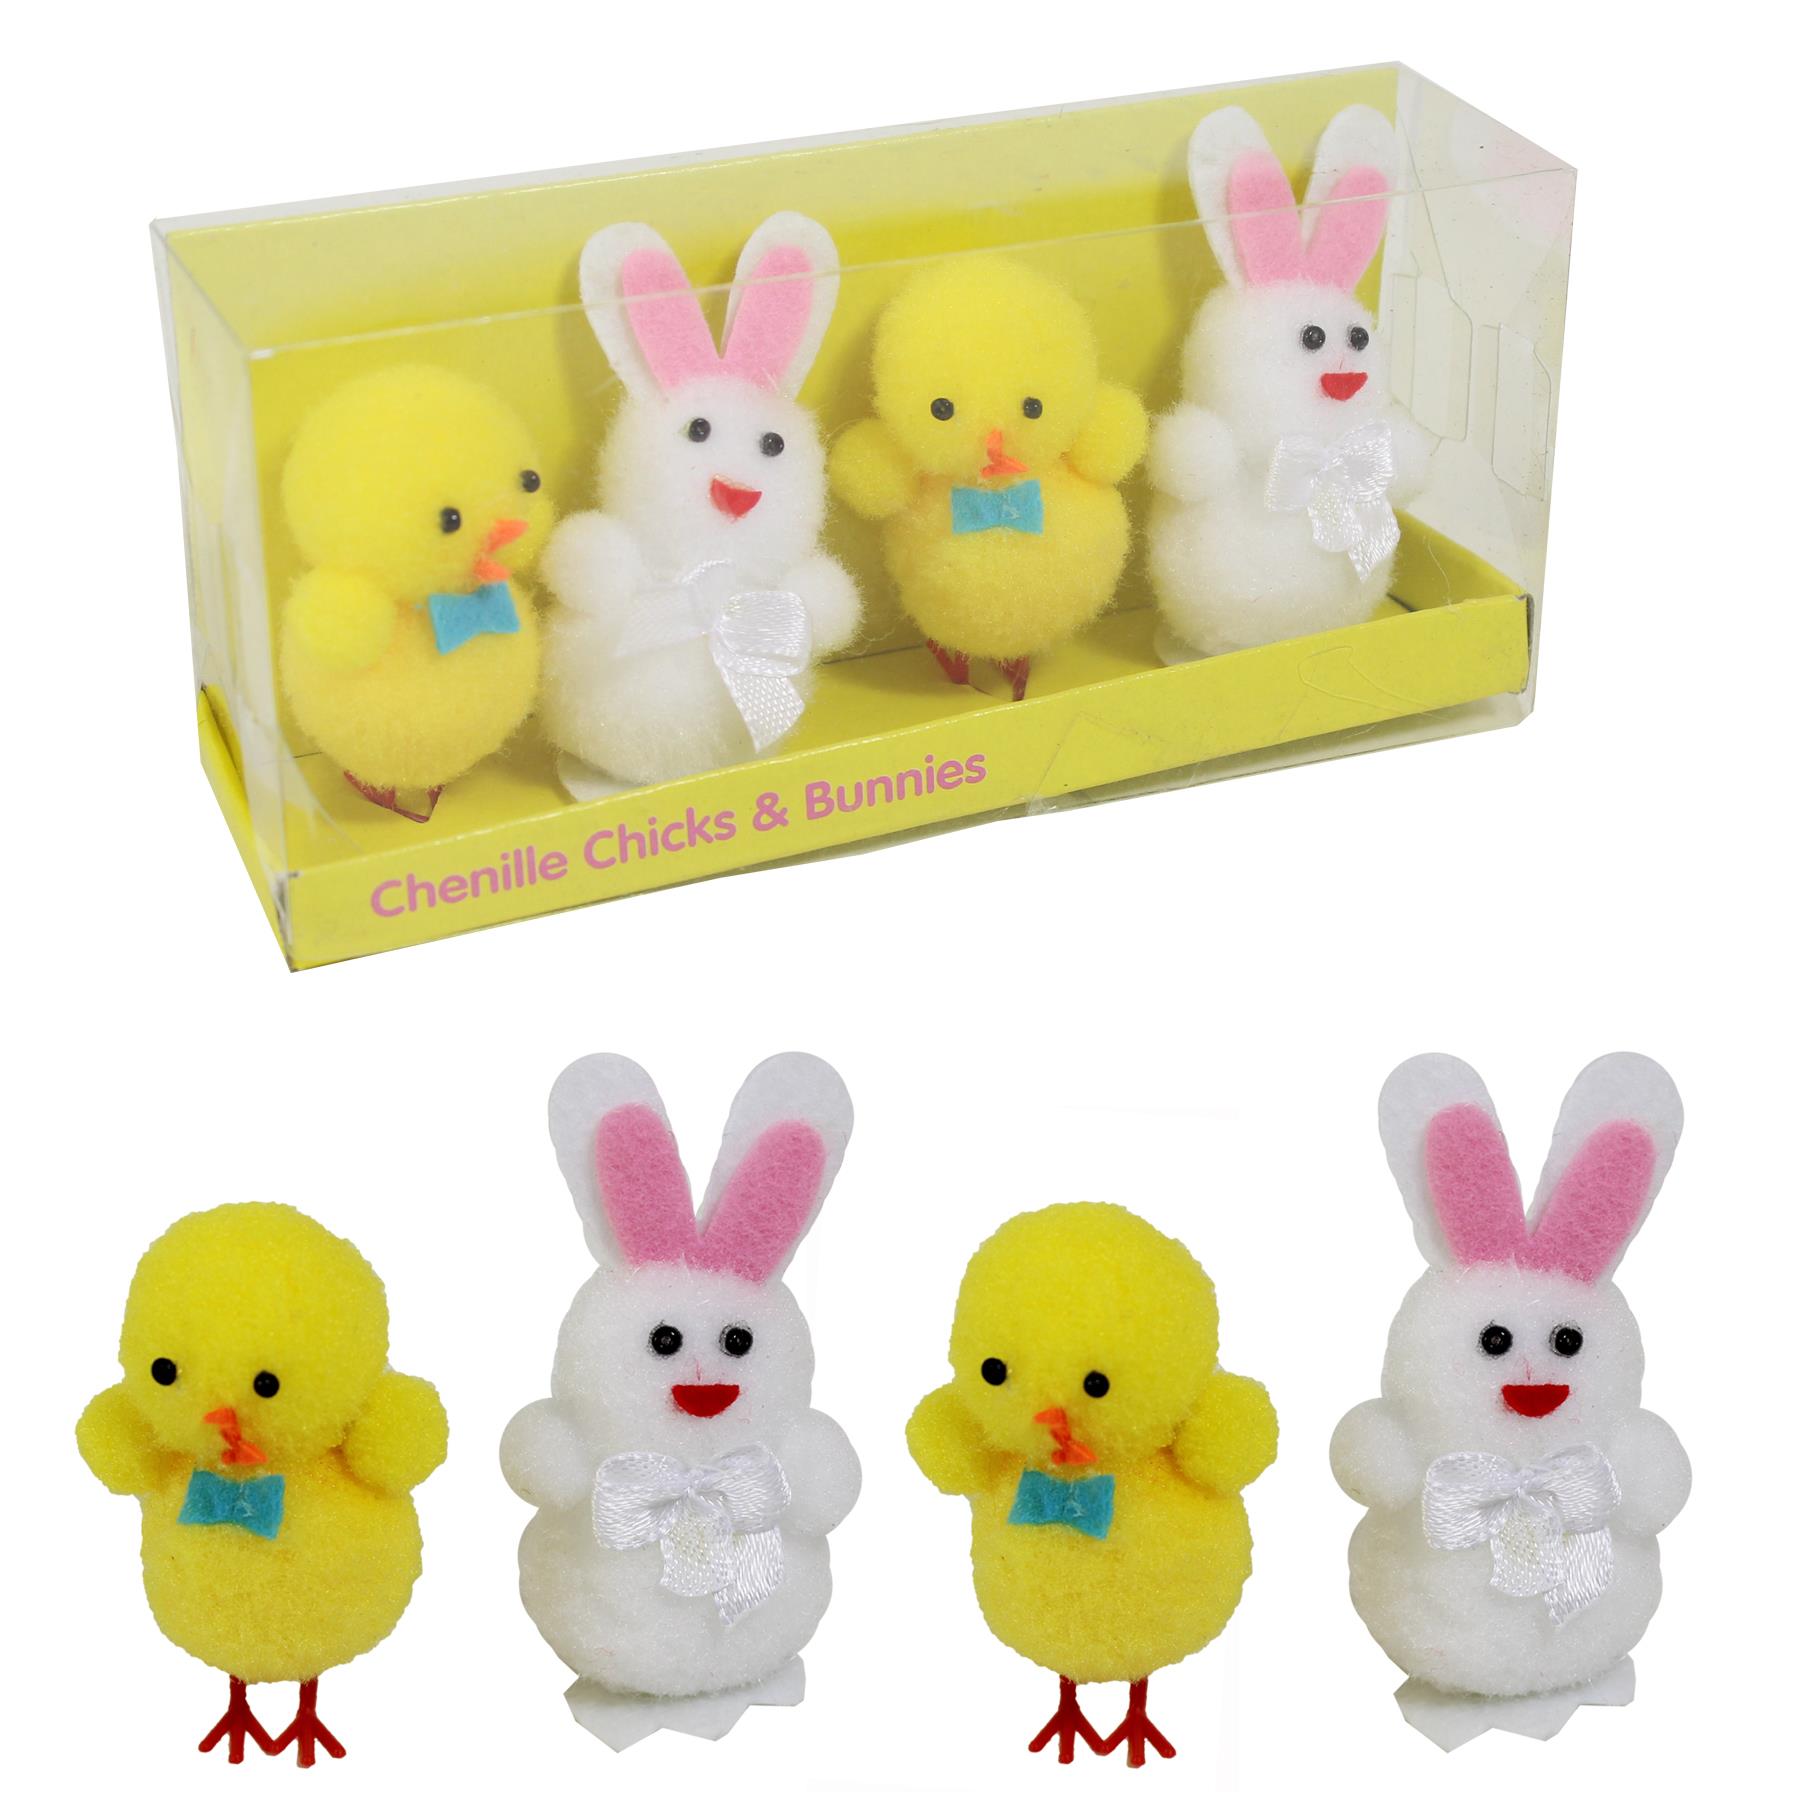 Easter Decorations, Bonnet Making, Arts and Crafts - 4 Pack Bunny and Chicks